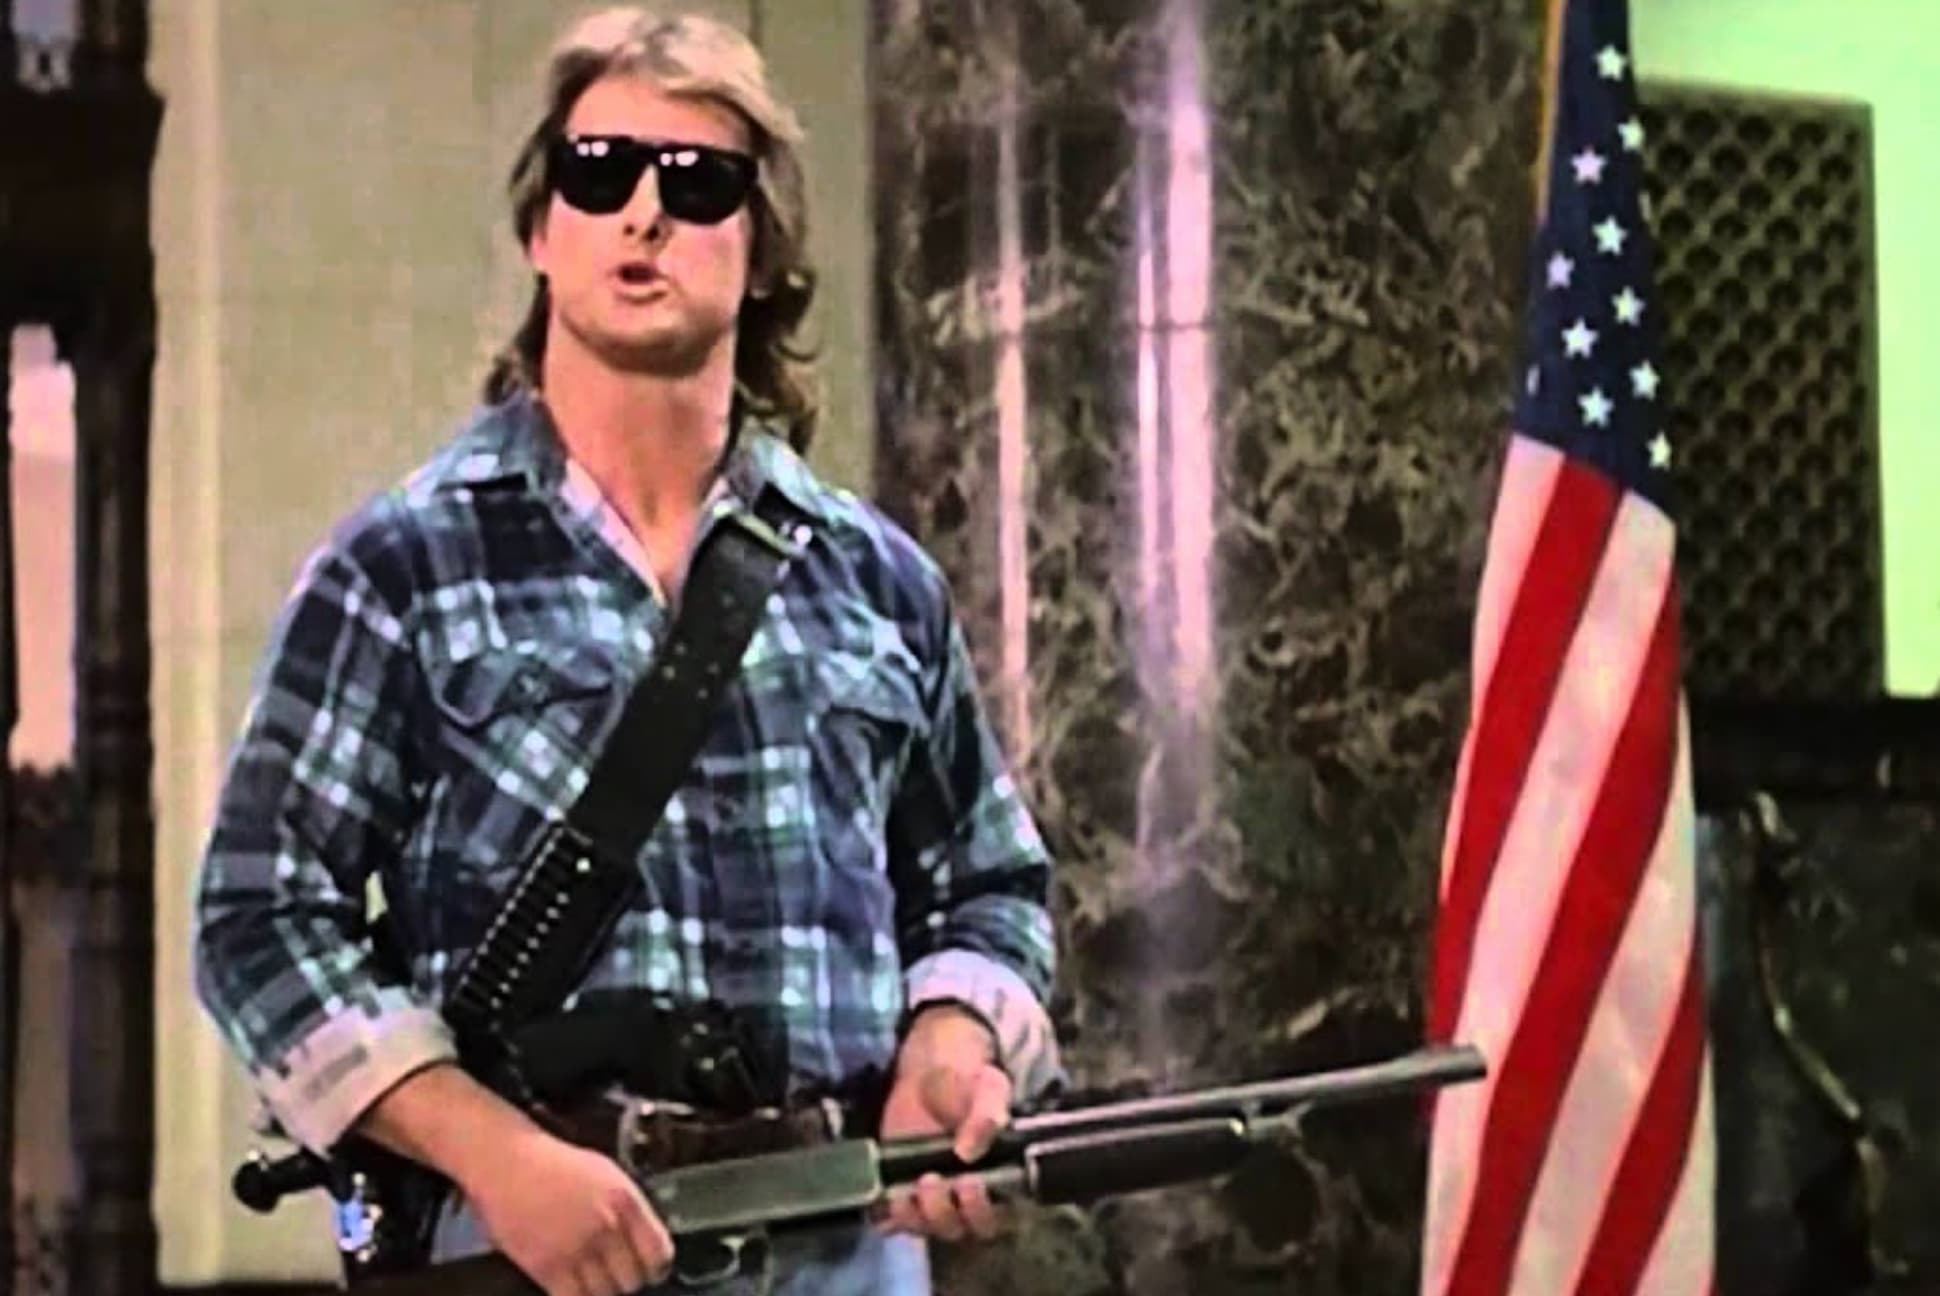 “Roddy Piper improvised the ‘I have come here to chew bubblegum and kick a—…. and I'm all out of bubblegum,’ line from They Live. John Carpenter told Roddy that he wasn't gonna rob the bank, but he was holding a shotgun and wearing sunglasses, so he needed to say something.”